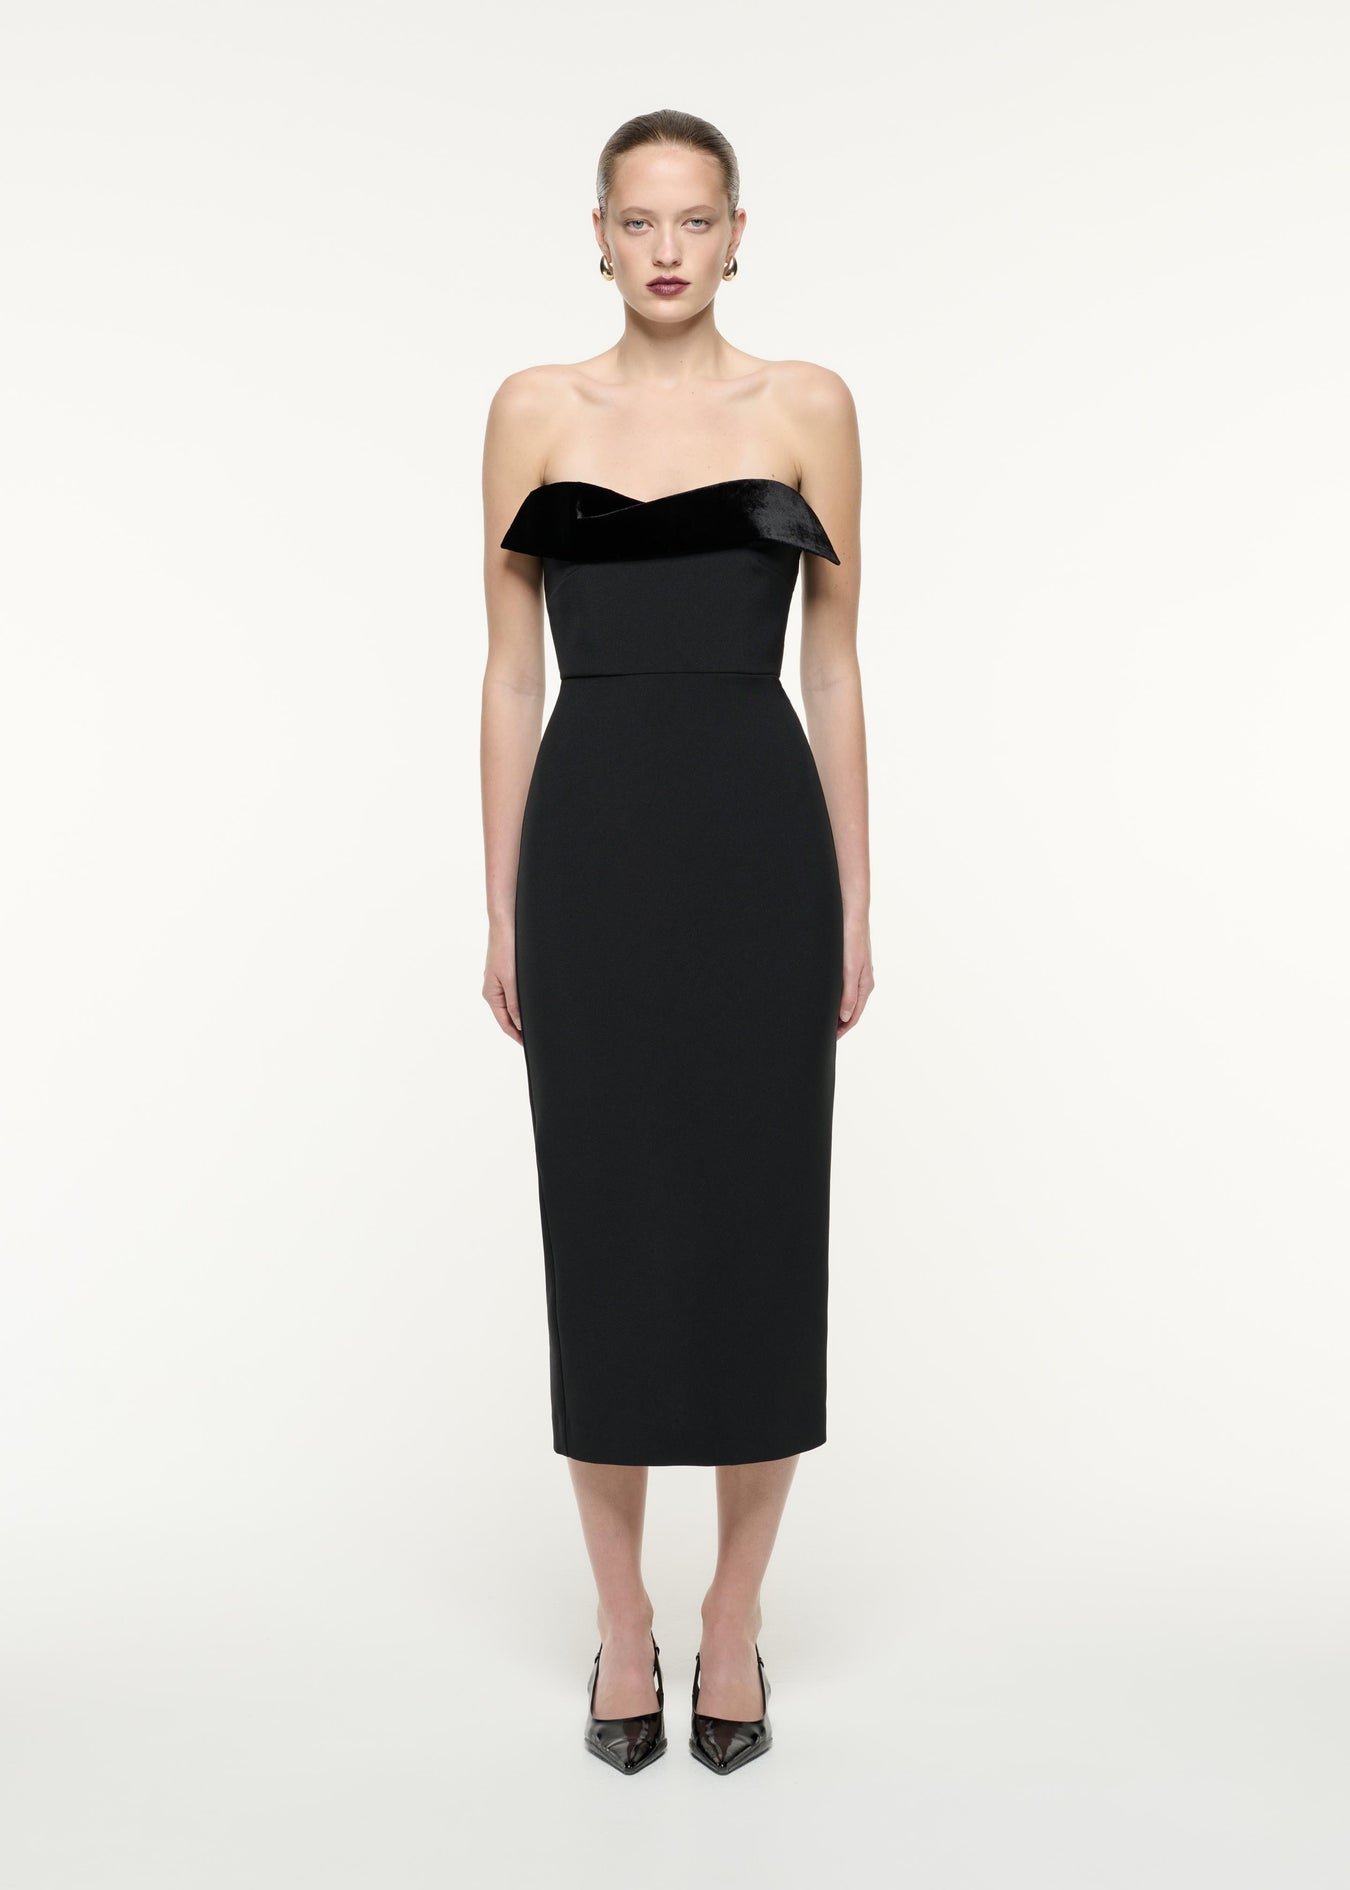 A front view image of a model wearing the Strapless Crepe Midi Dress in Black